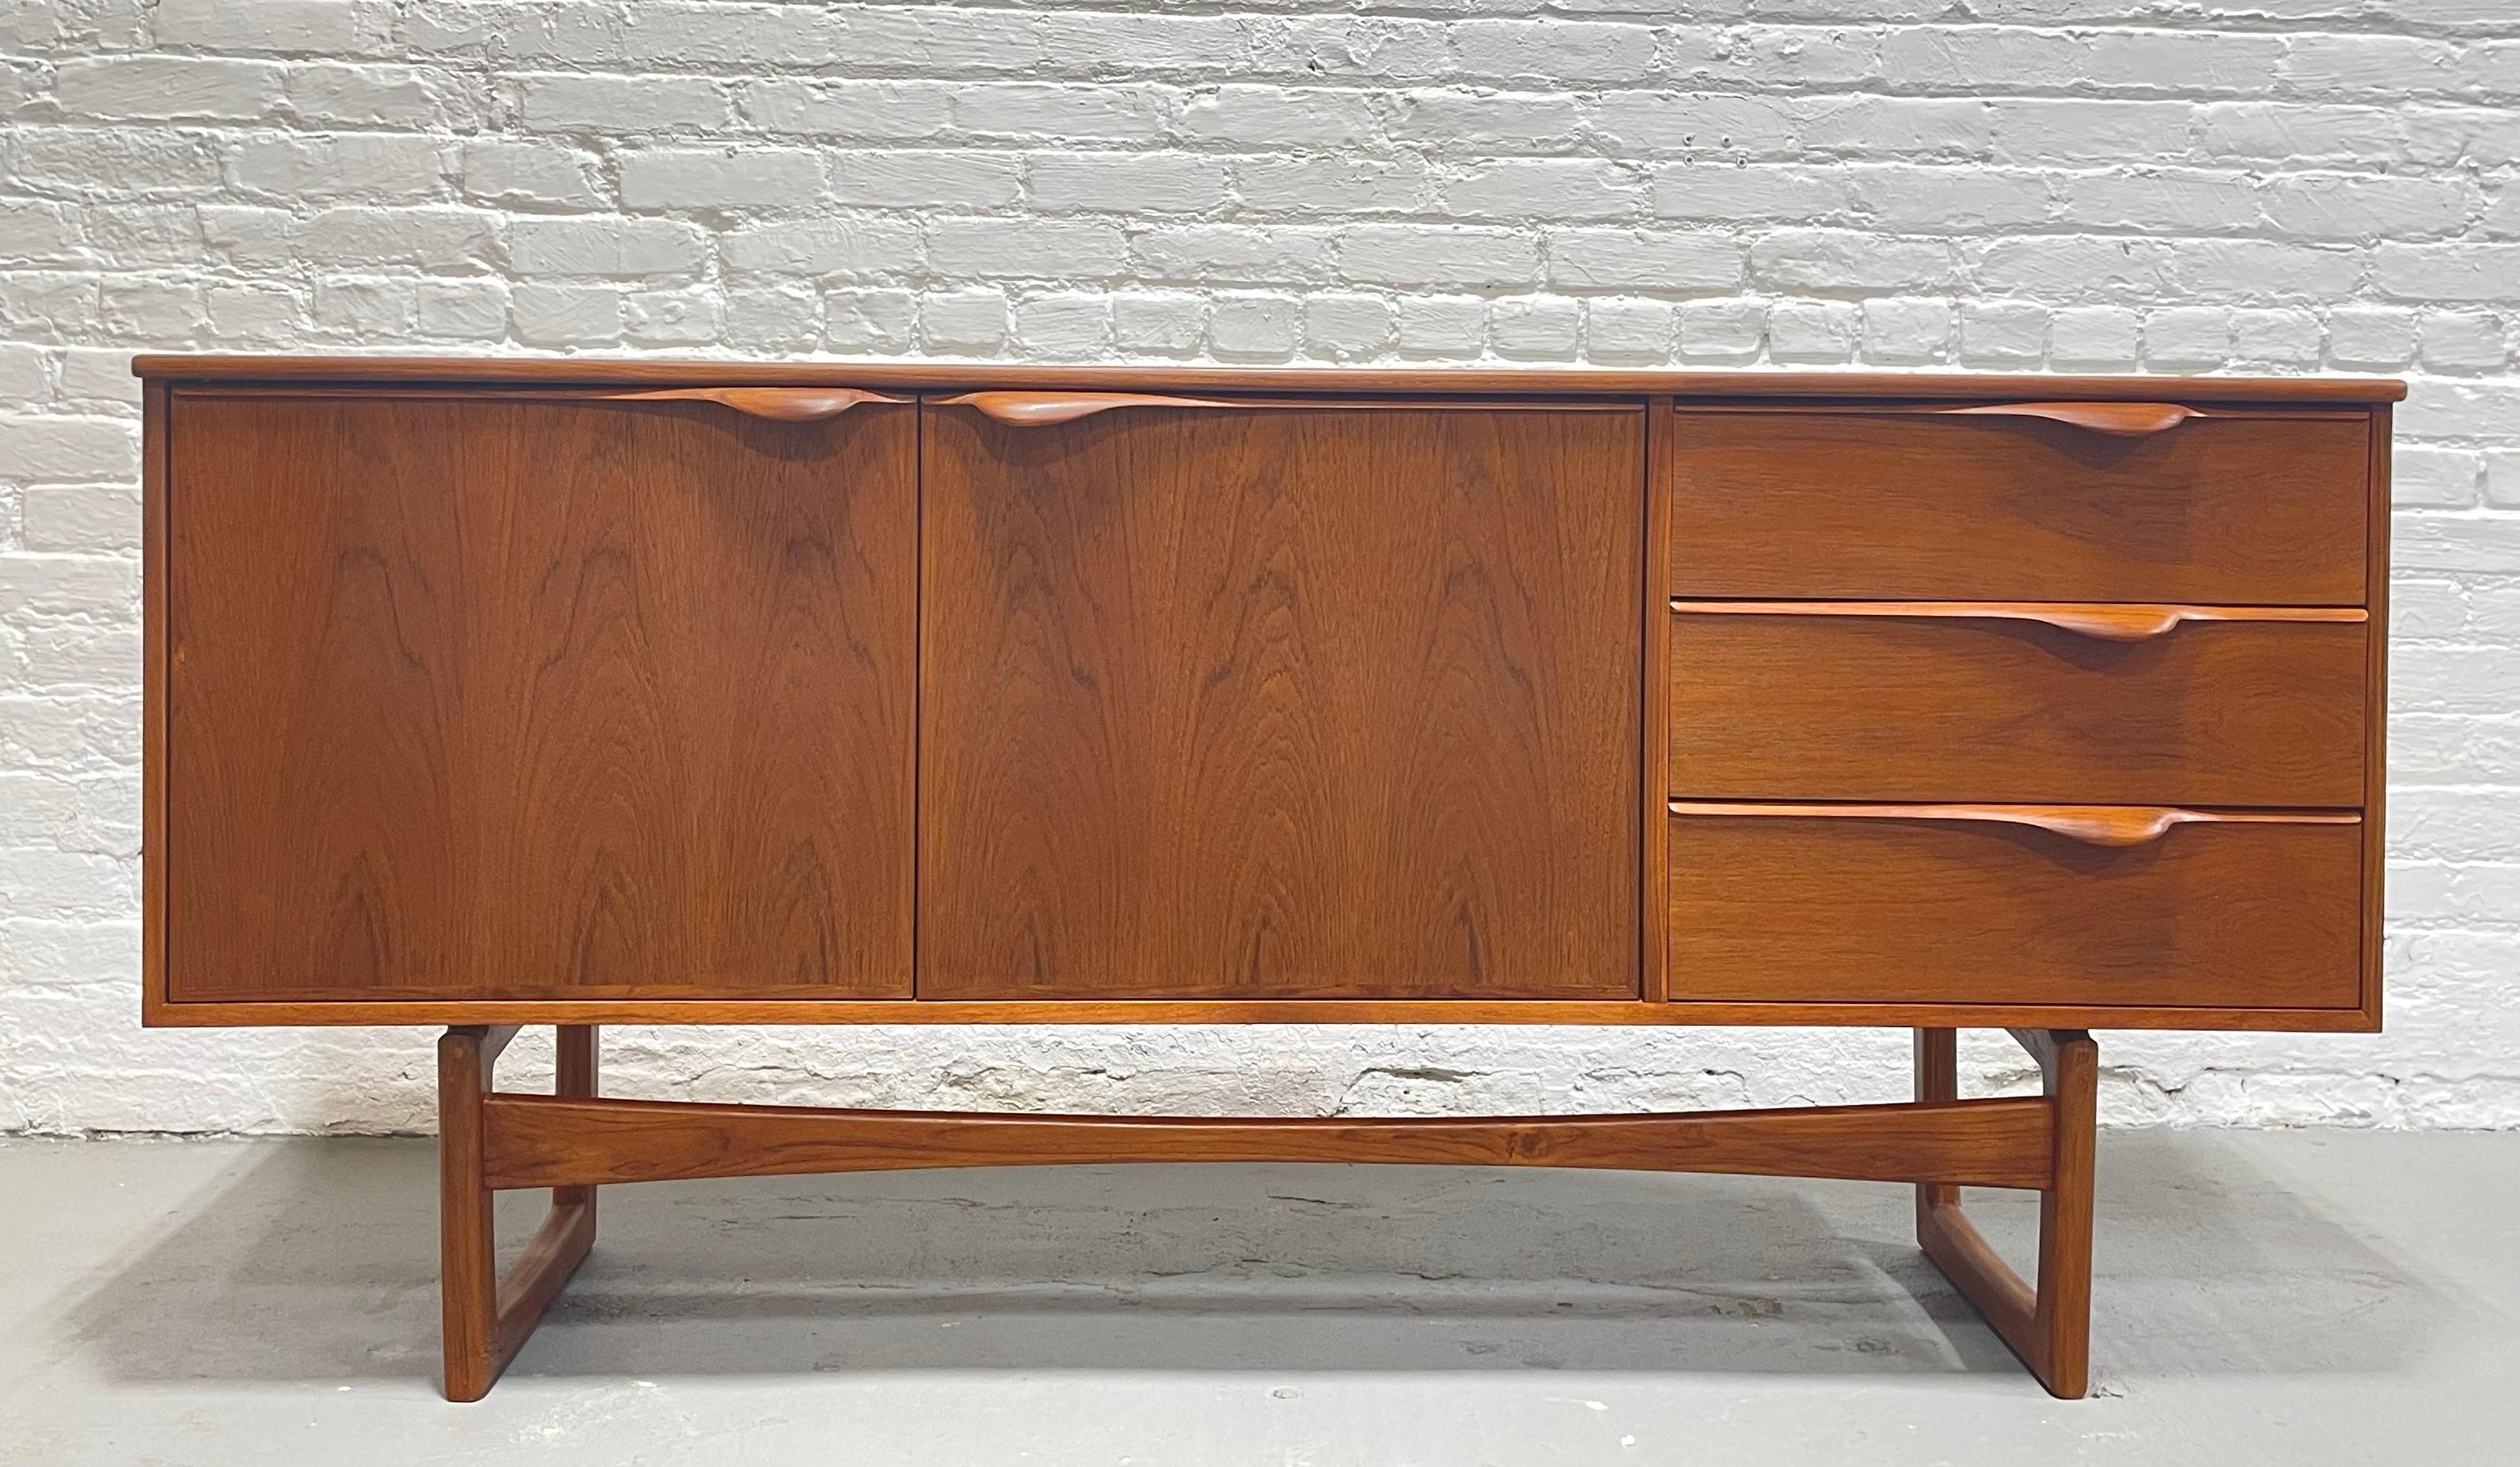 Contemporary Sculpted Mid-Century Modern Danish Styled Credenza Media Stand For Sale